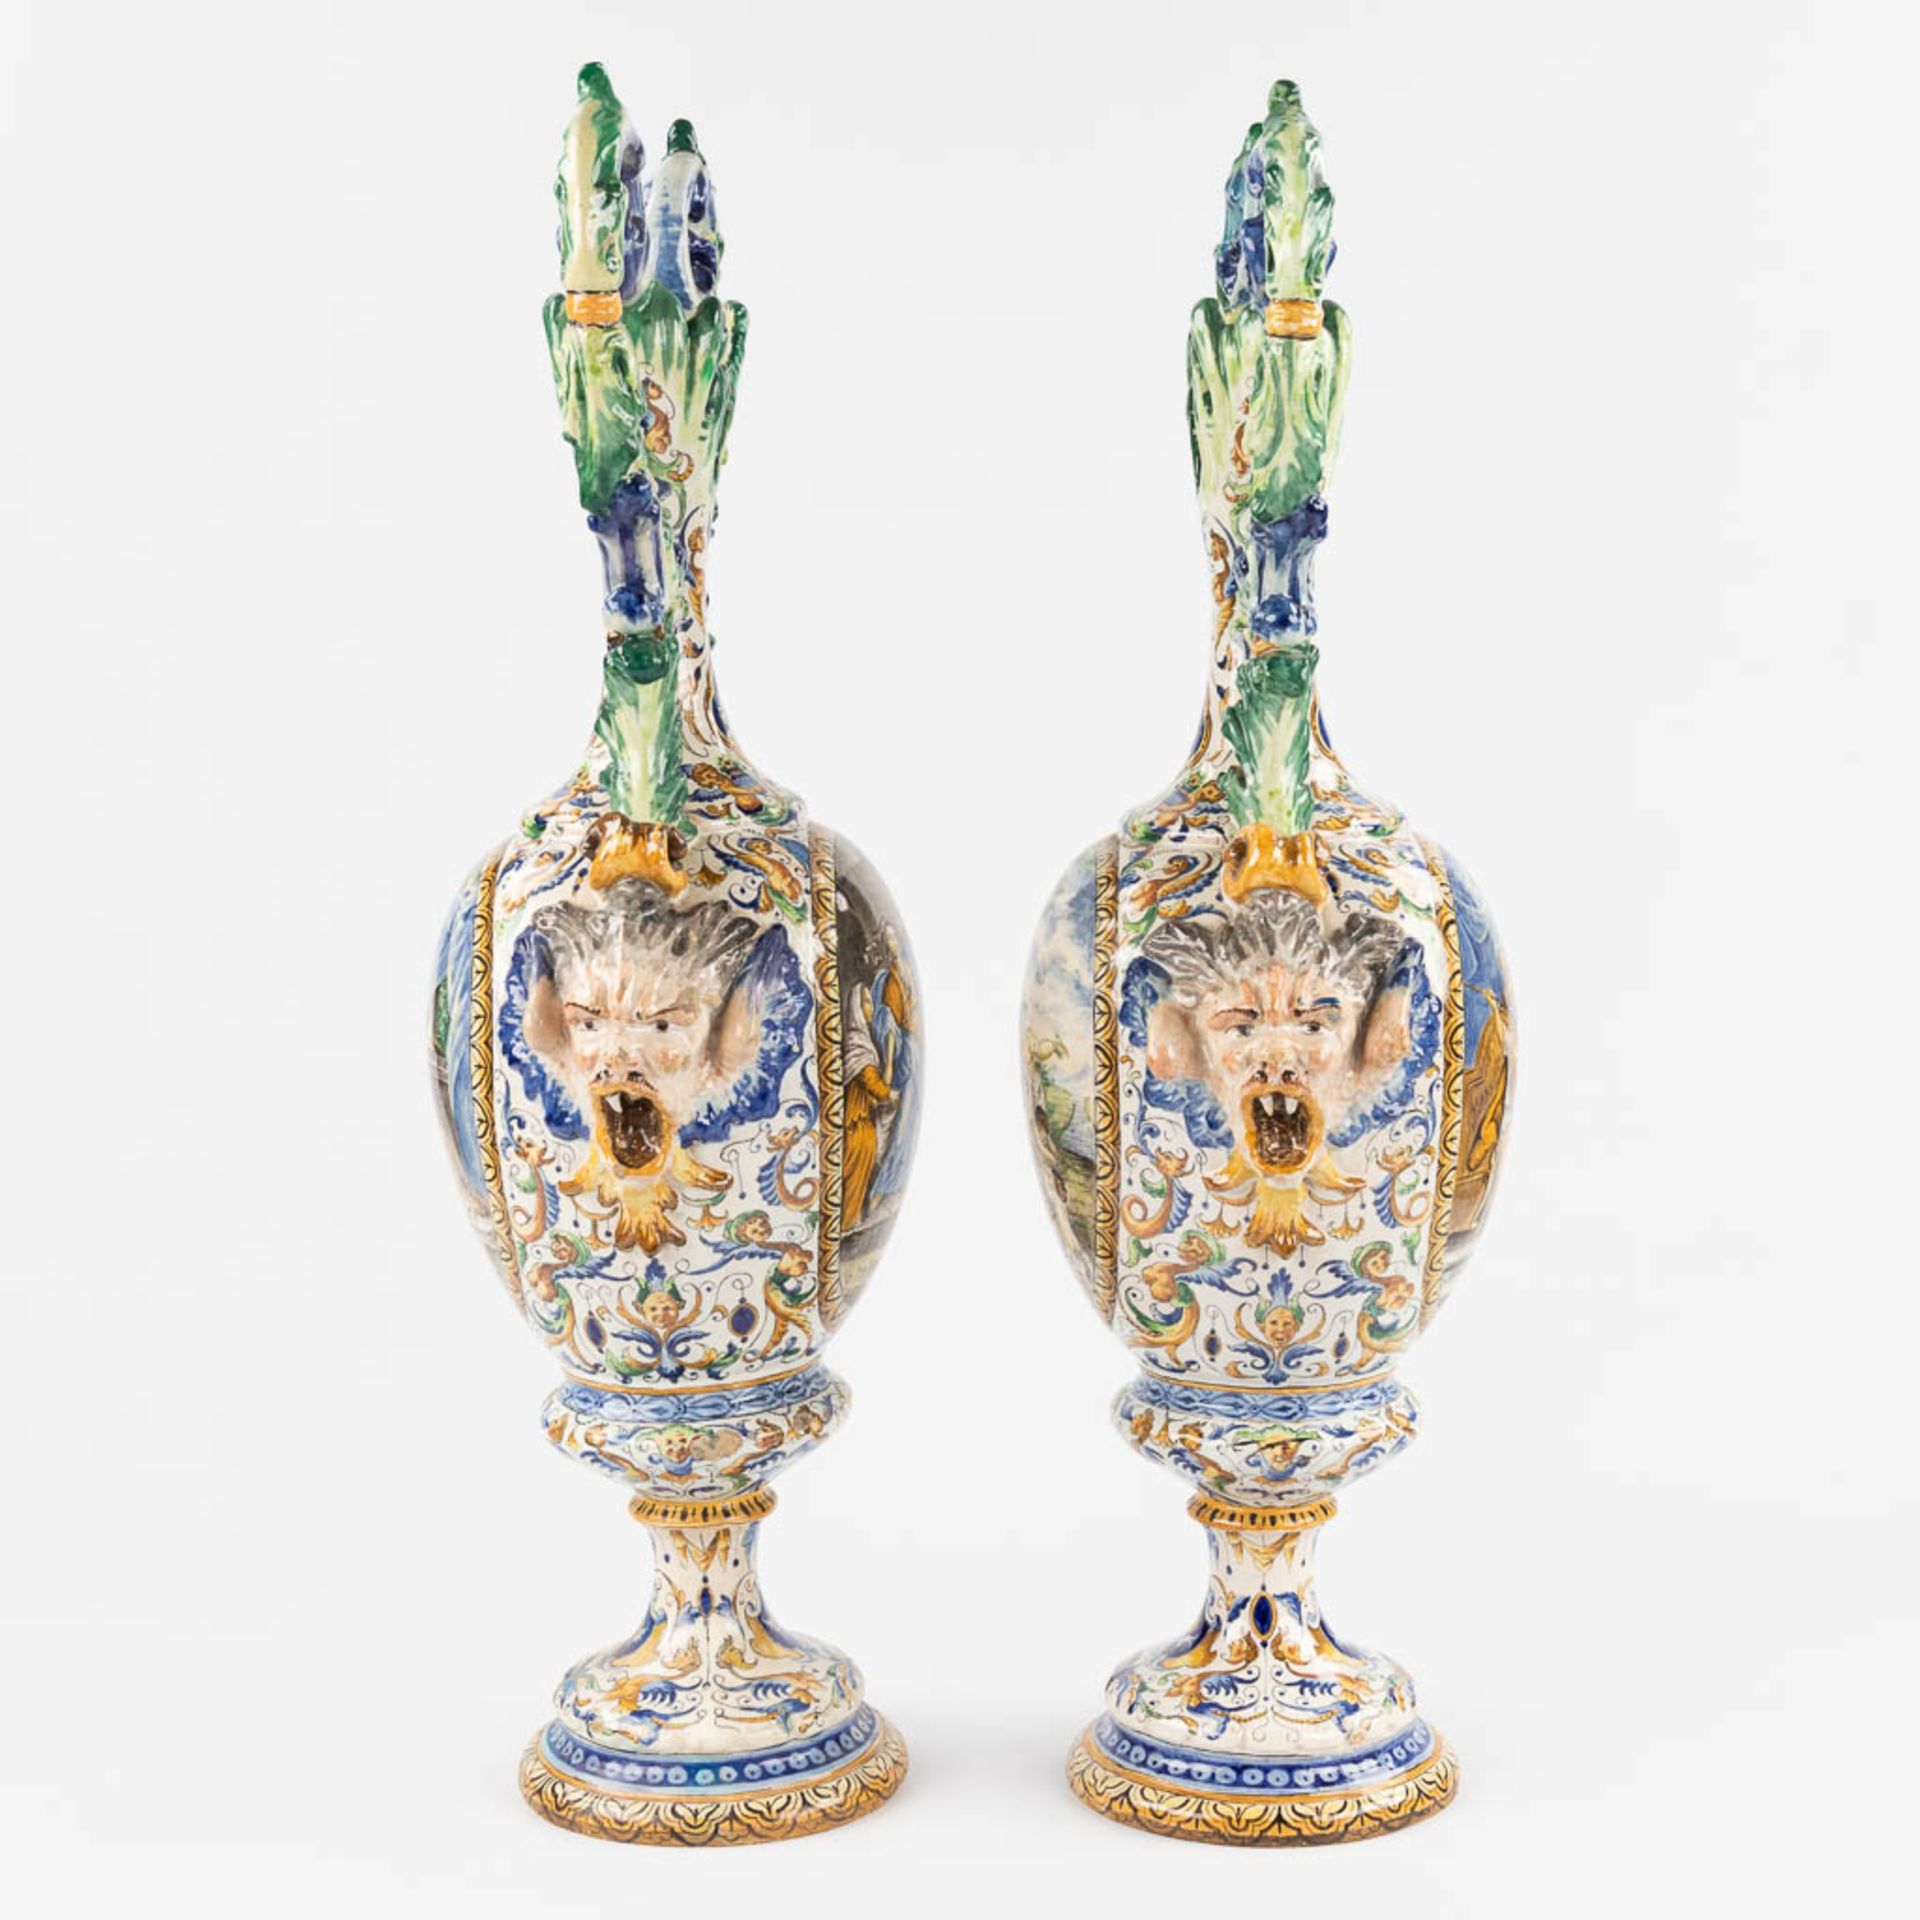 A pair of large vases, Italian Renaissance style, glazed faience. 20th C. (D:45 x W:45 x H:205 cm) - Image 4 of 31